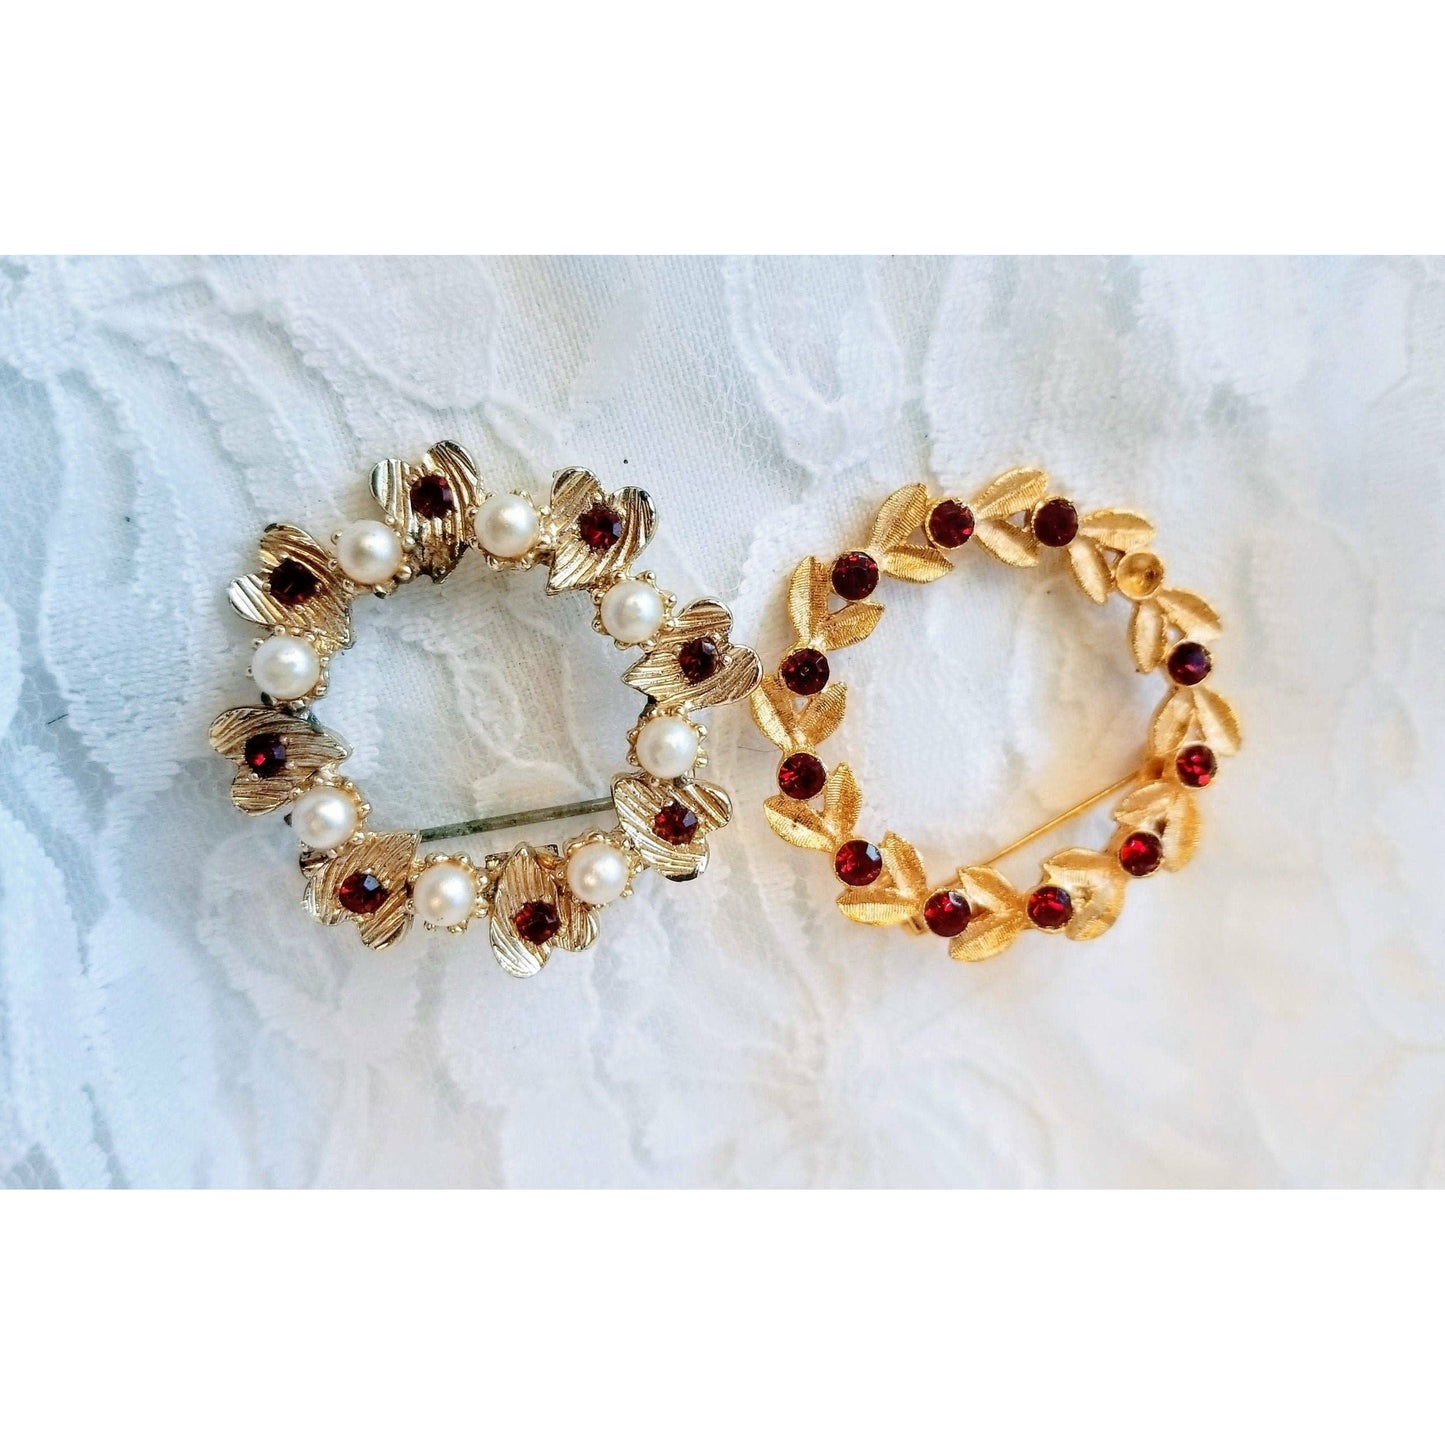 Set of 2 Red and Gold Tone Circle Brooches 1950s Red Crystal Rhinestone and Seed Pearl Pins Brooches Brooch